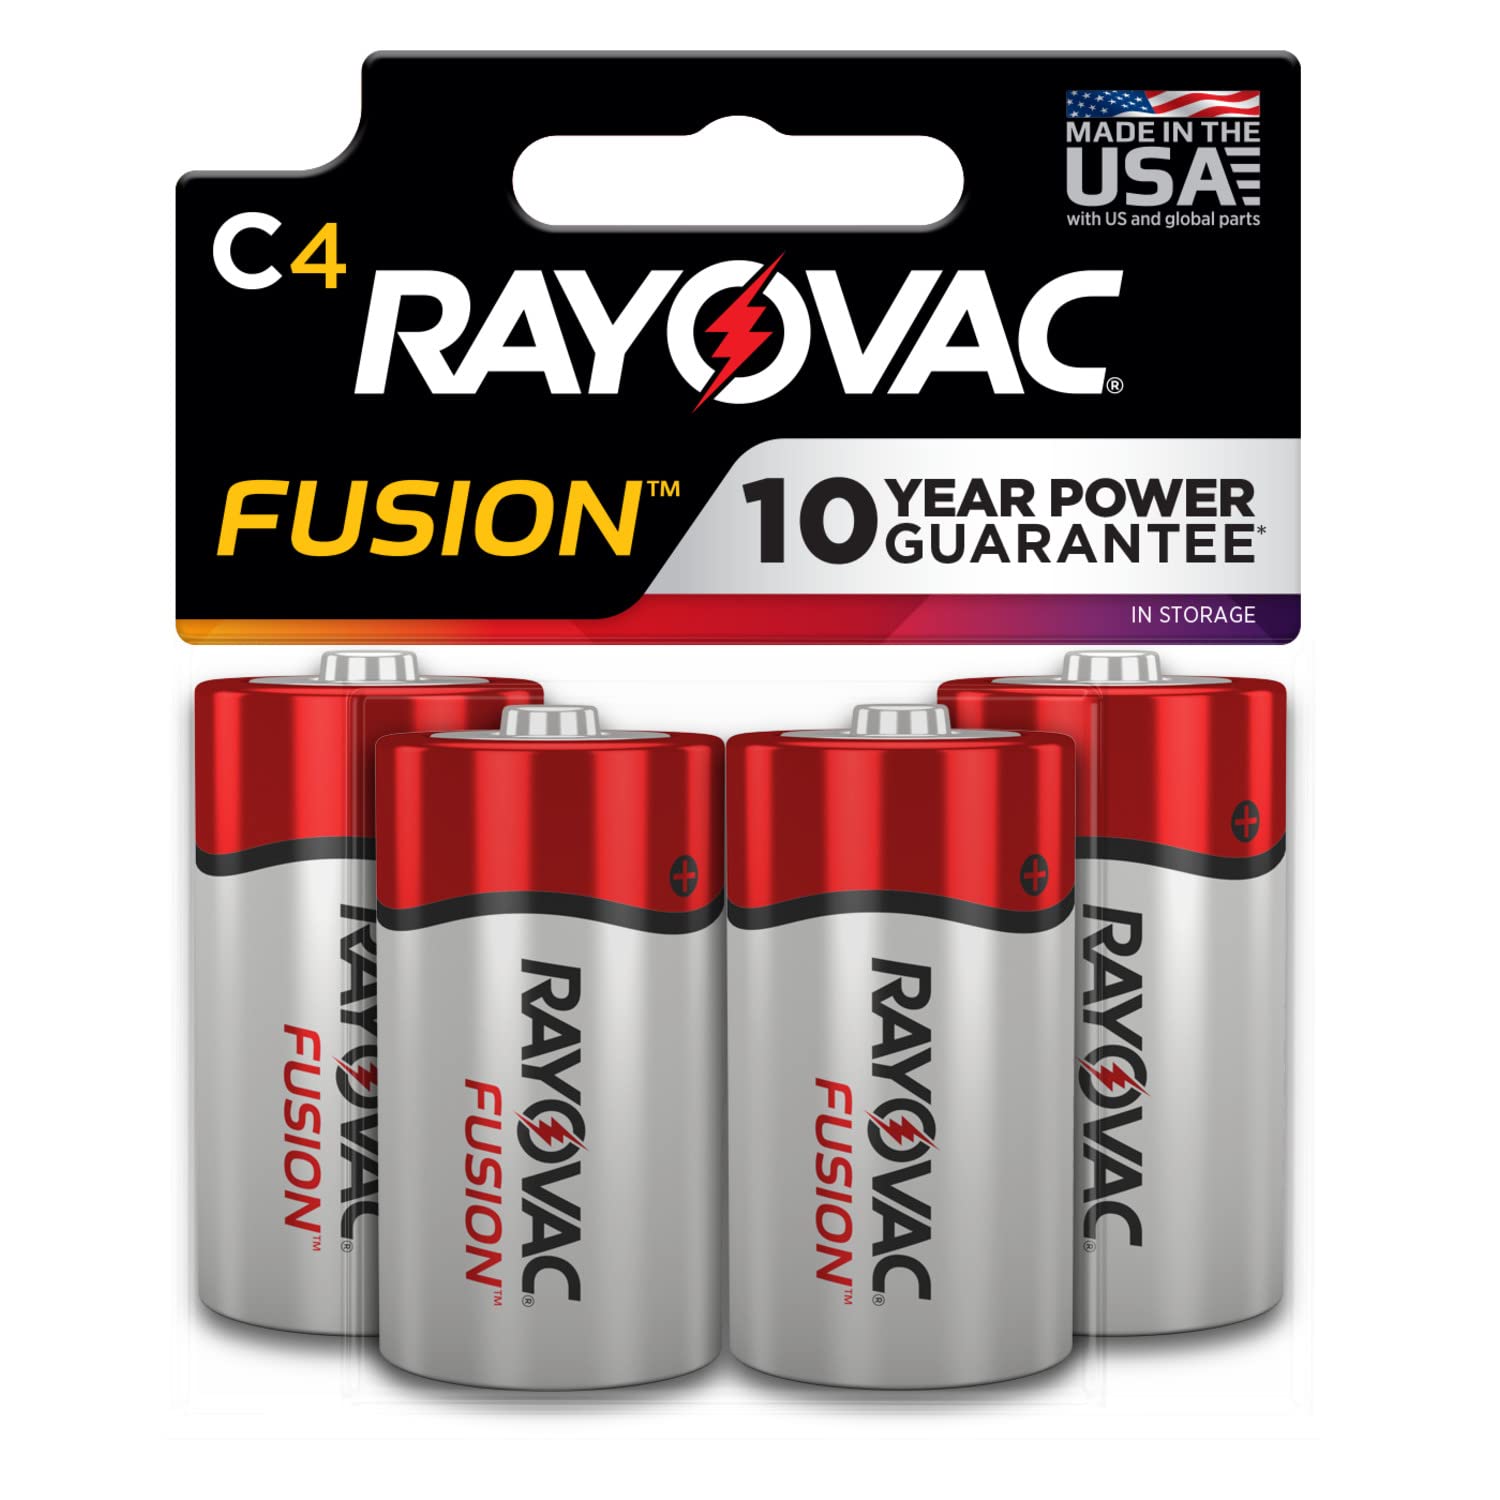 Rayovac C Batteries, Fusion Premium C Cell Batteries Alkaline, 4 Count